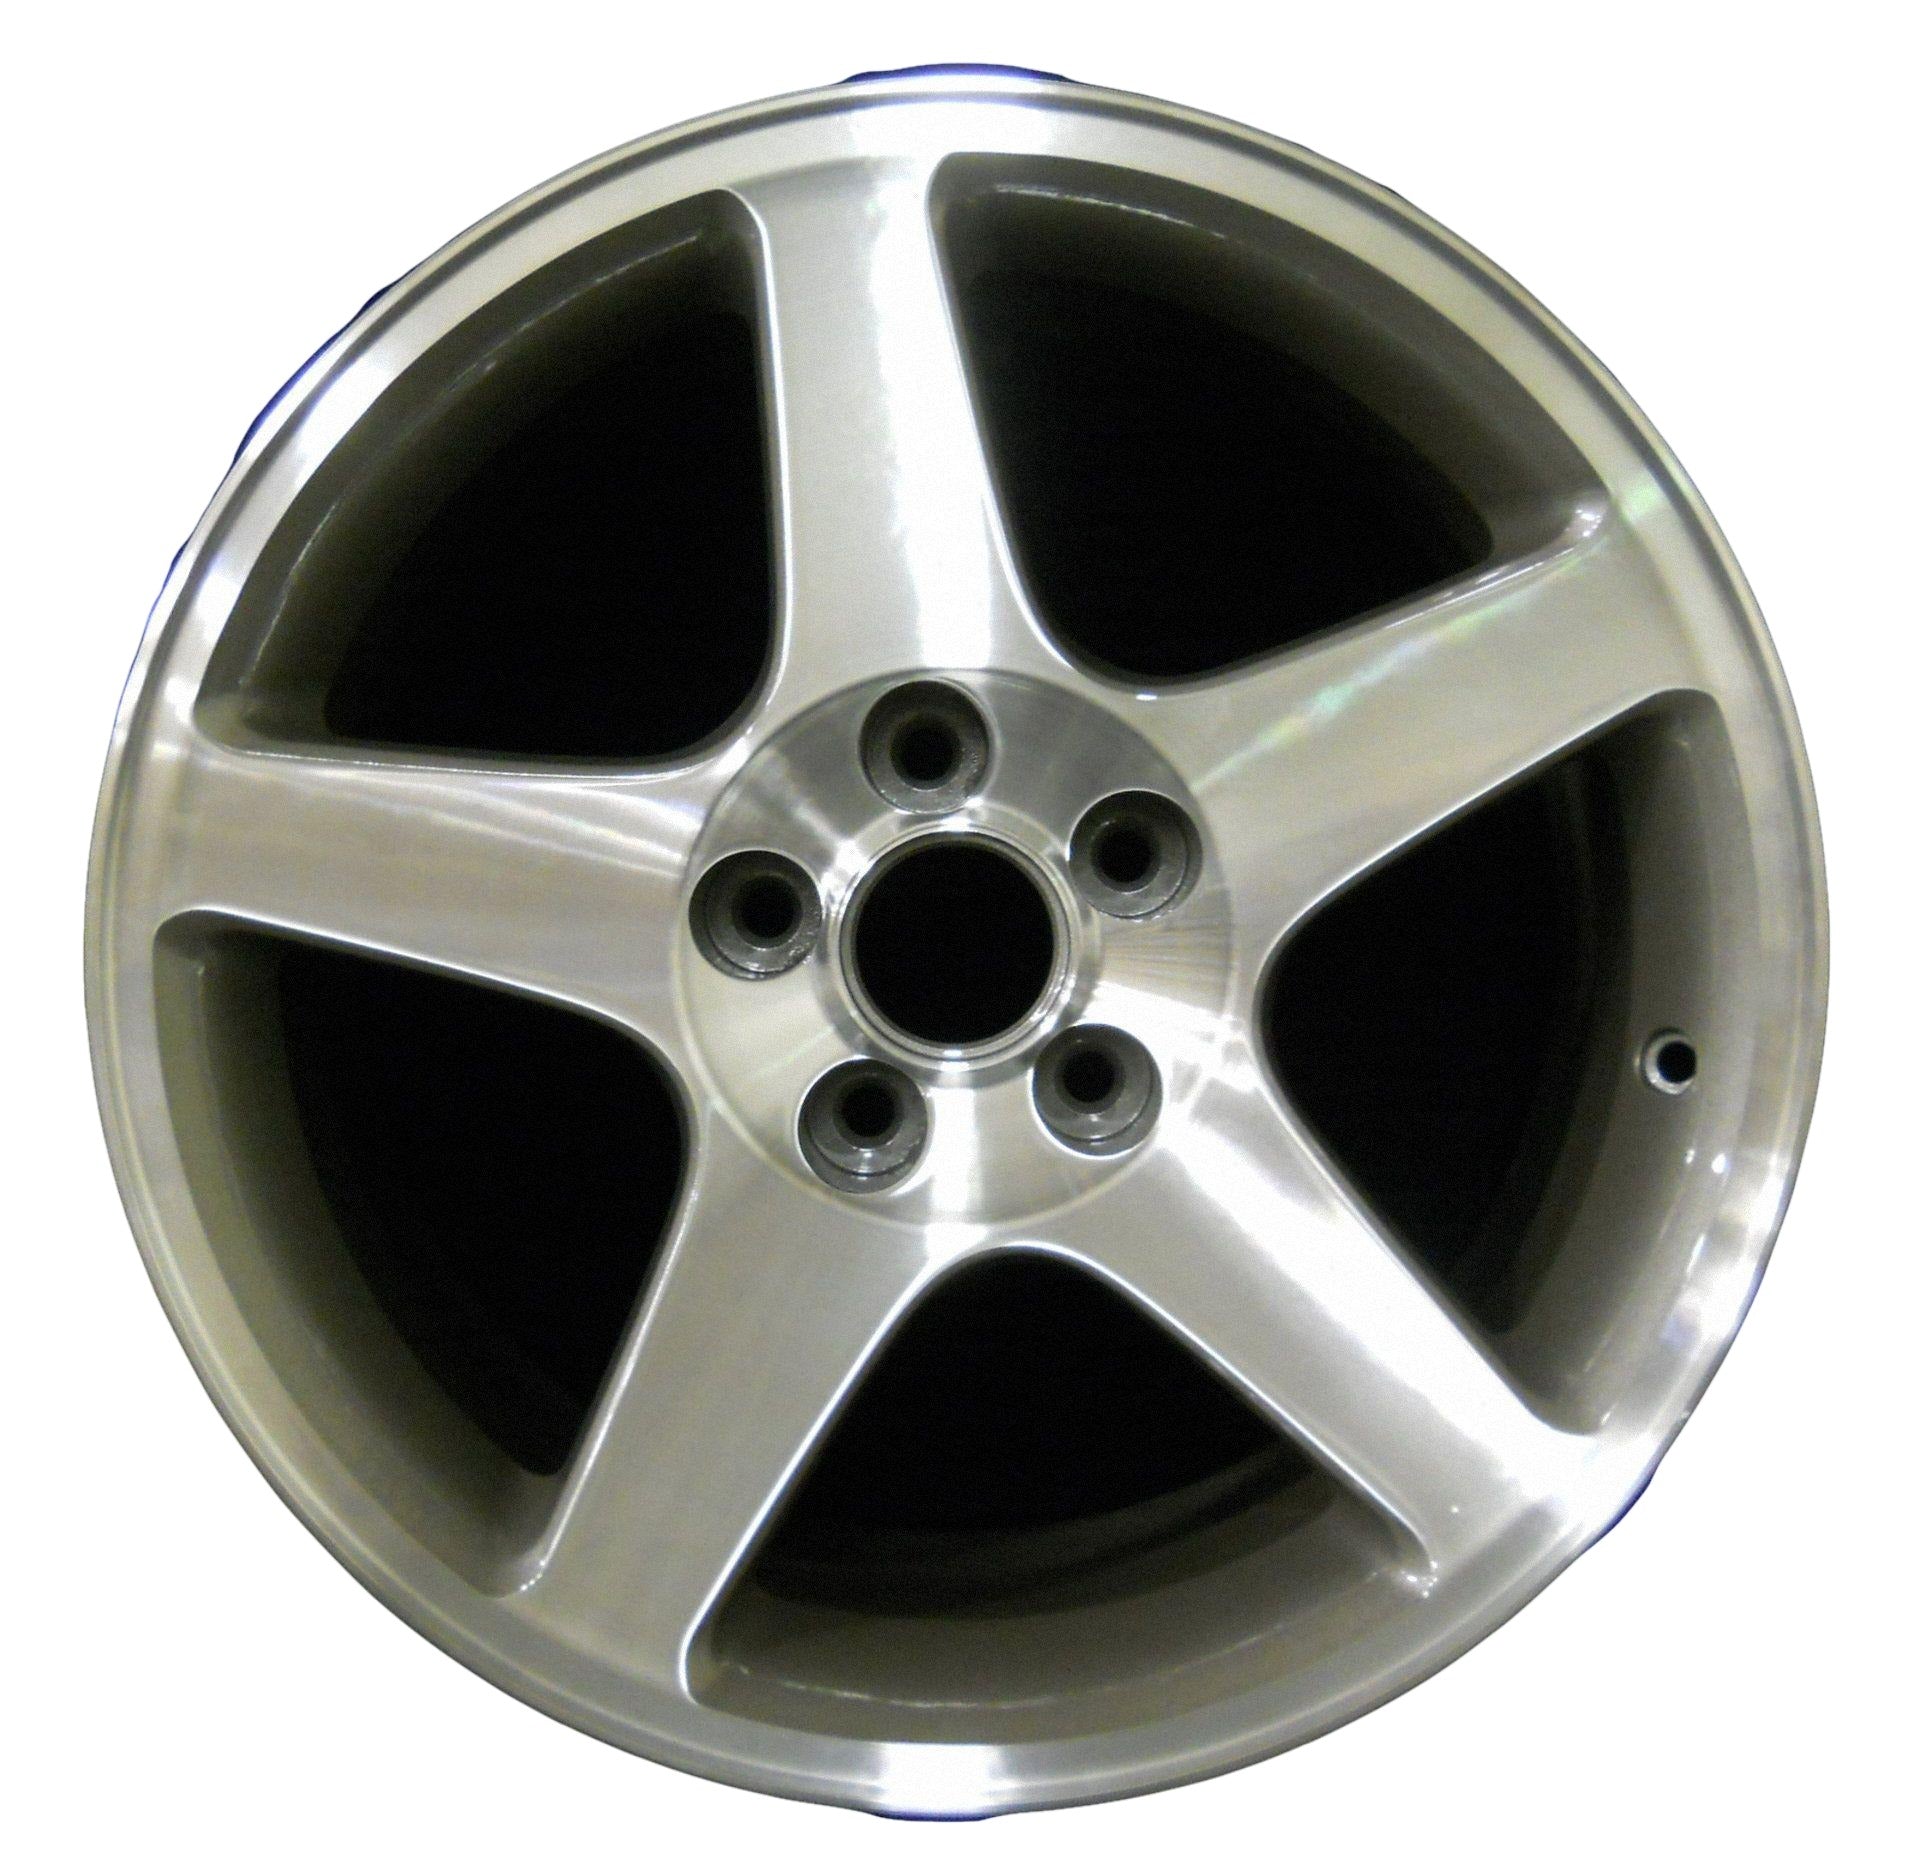 Ford Mustang  2003, 2004 Factory OEM Car Wheel Size 17x9 Alloy WAO.3476.PC12.MA